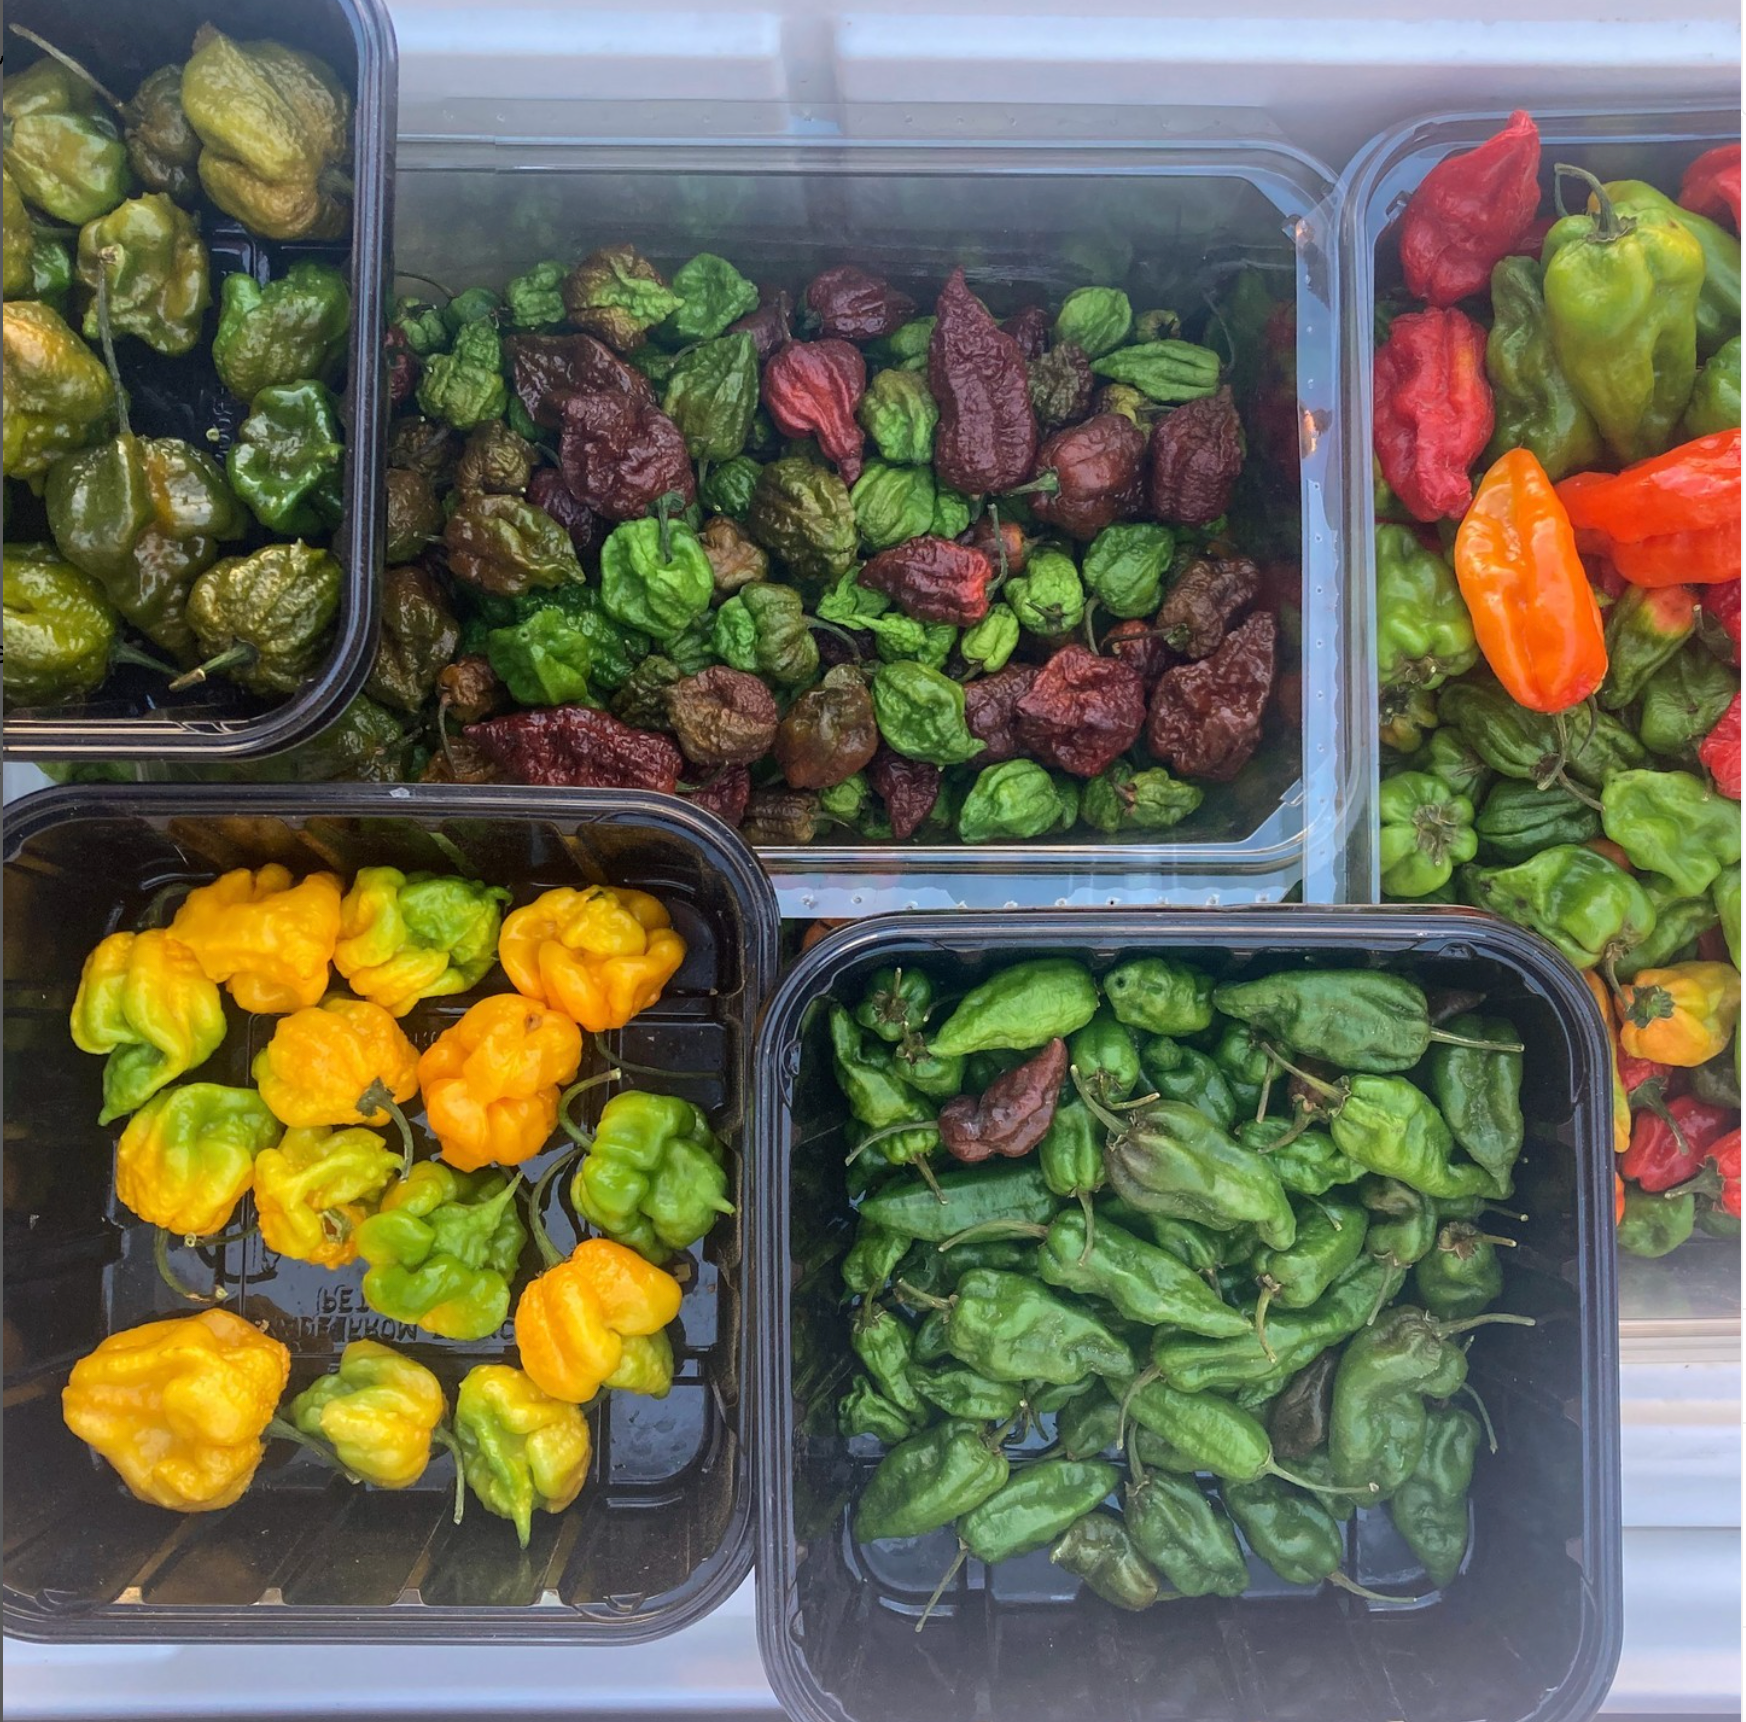 A variety of chile peppers of various colors, in containers